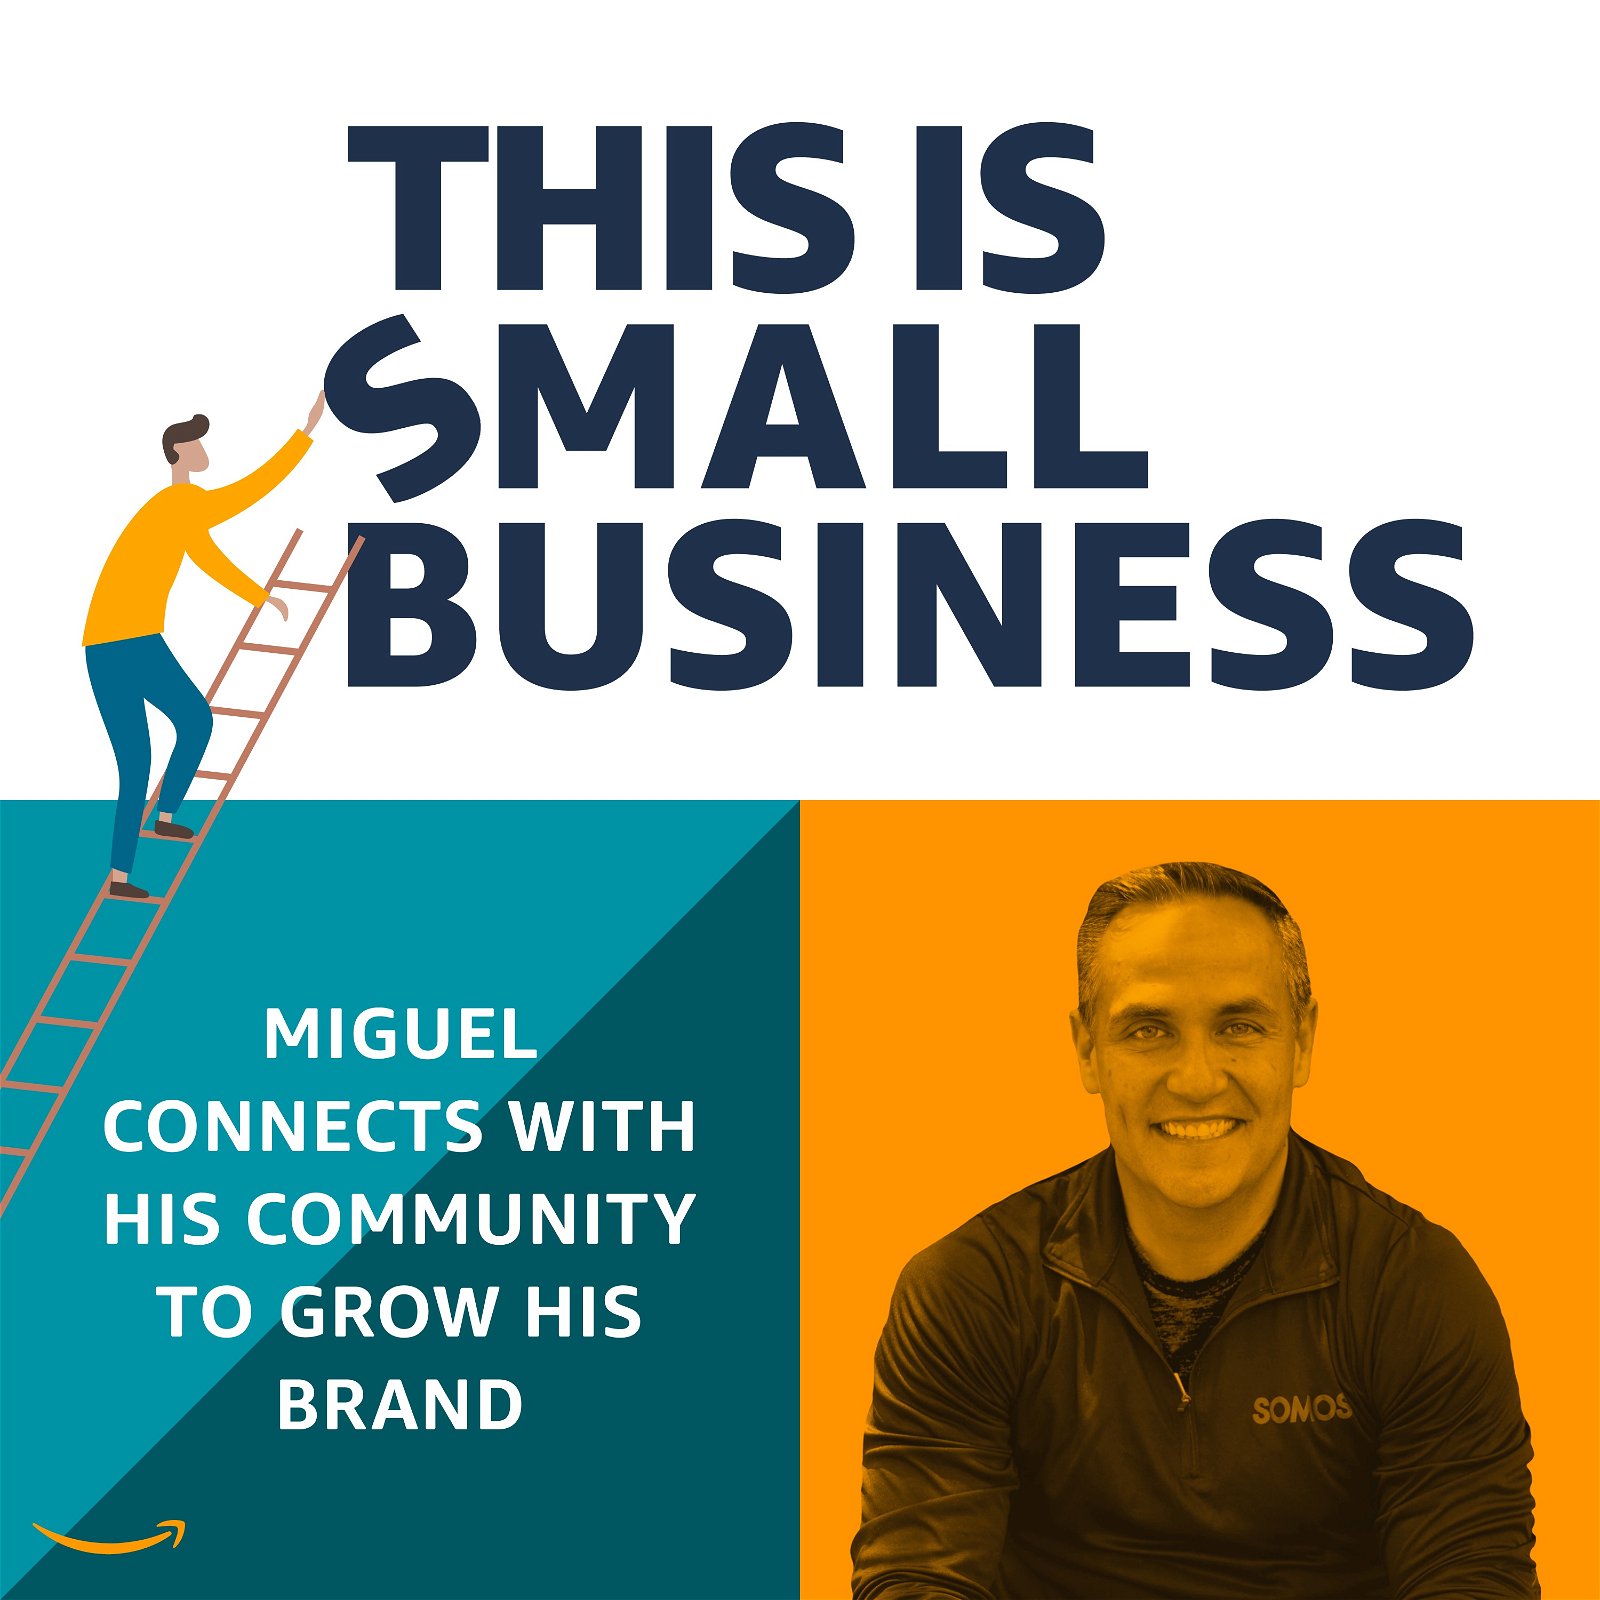 Miguel Connects With His Community to Grow His Brand